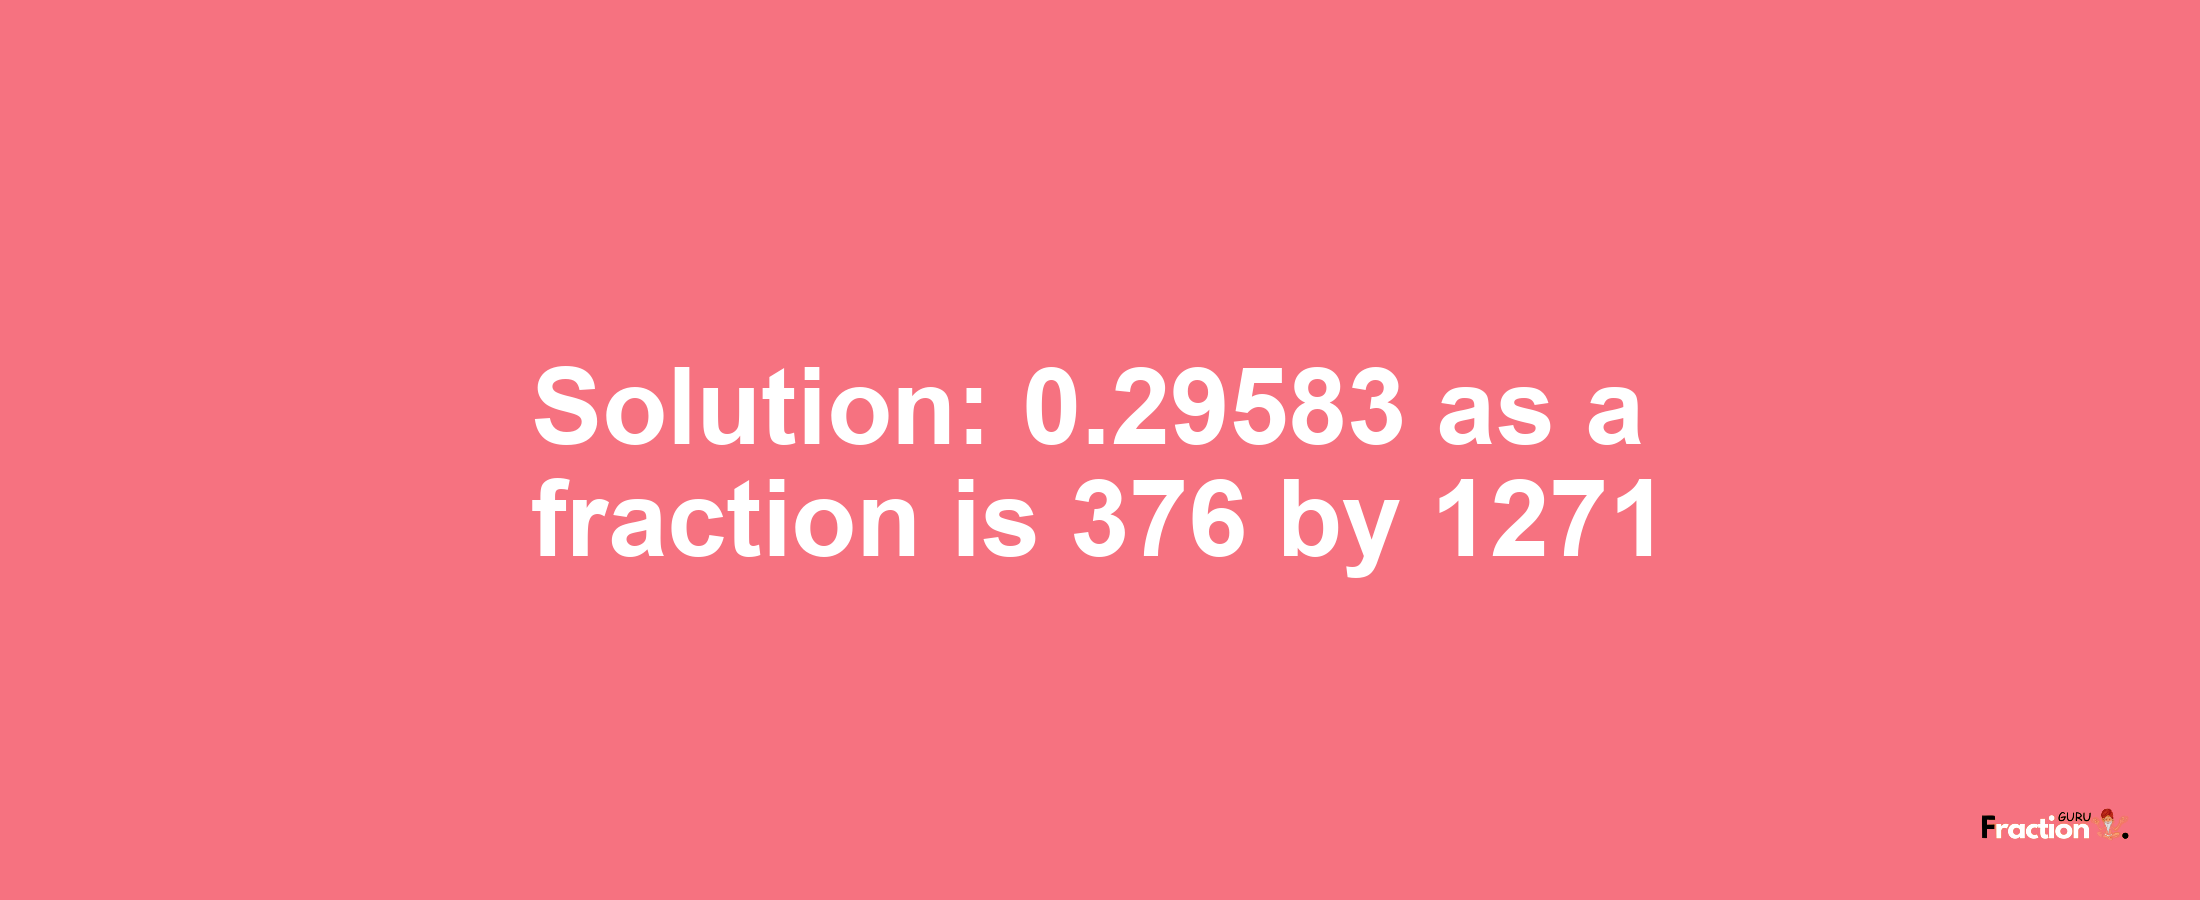 Solution:0.29583 as a fraction is 376/1271